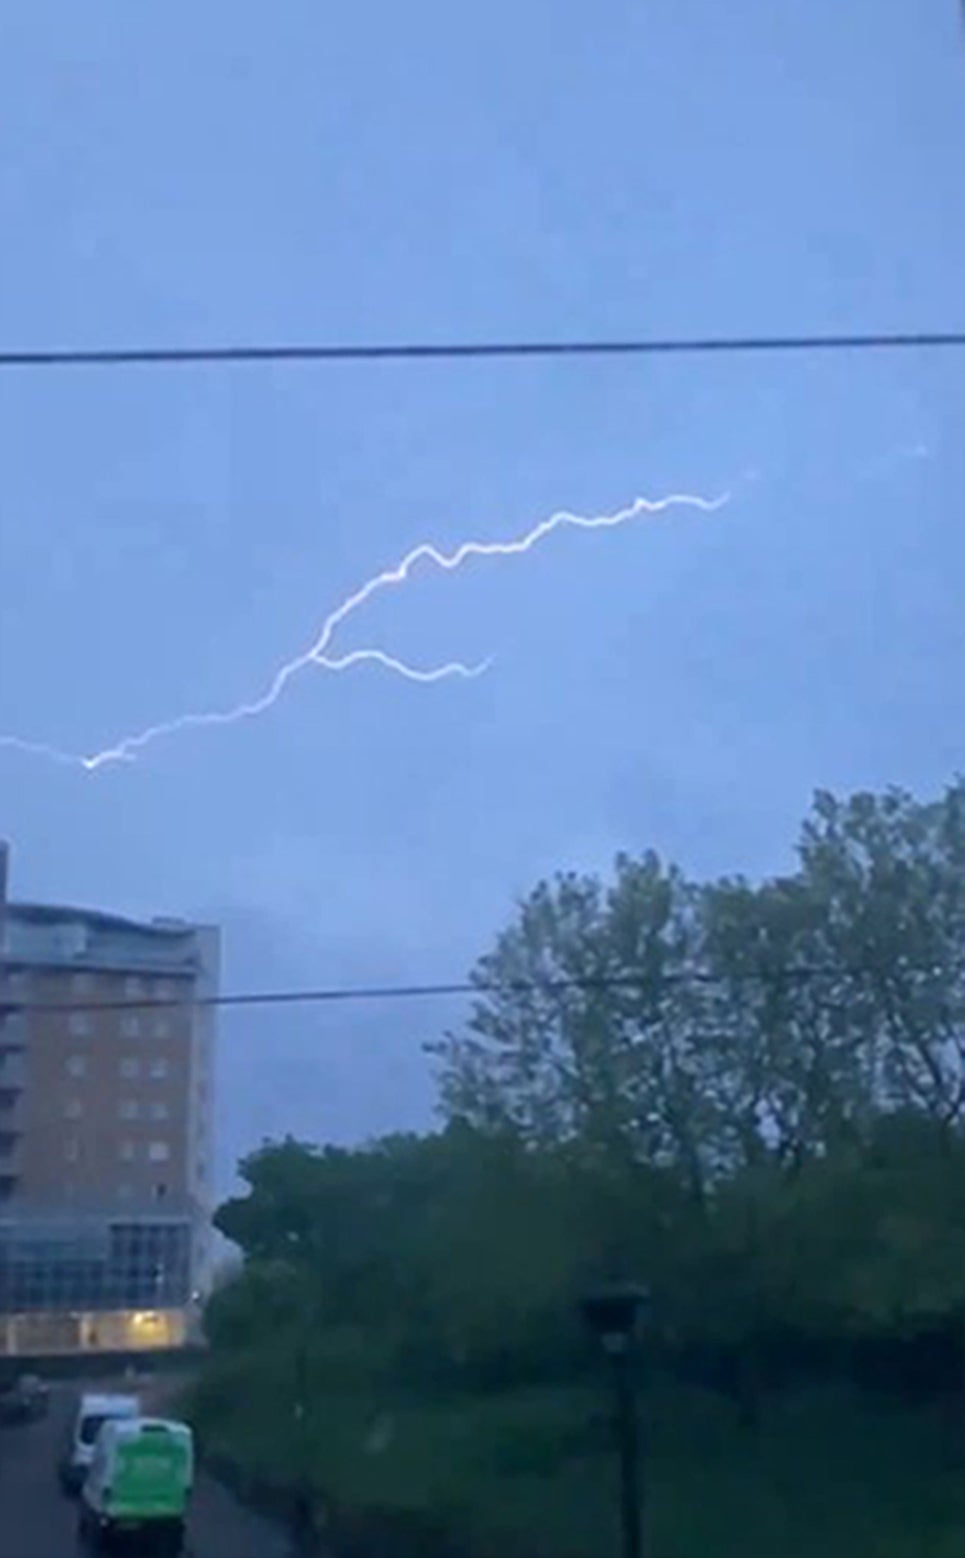 Lightning seen in the skies over Bow, East London at 5.30am on Thursday